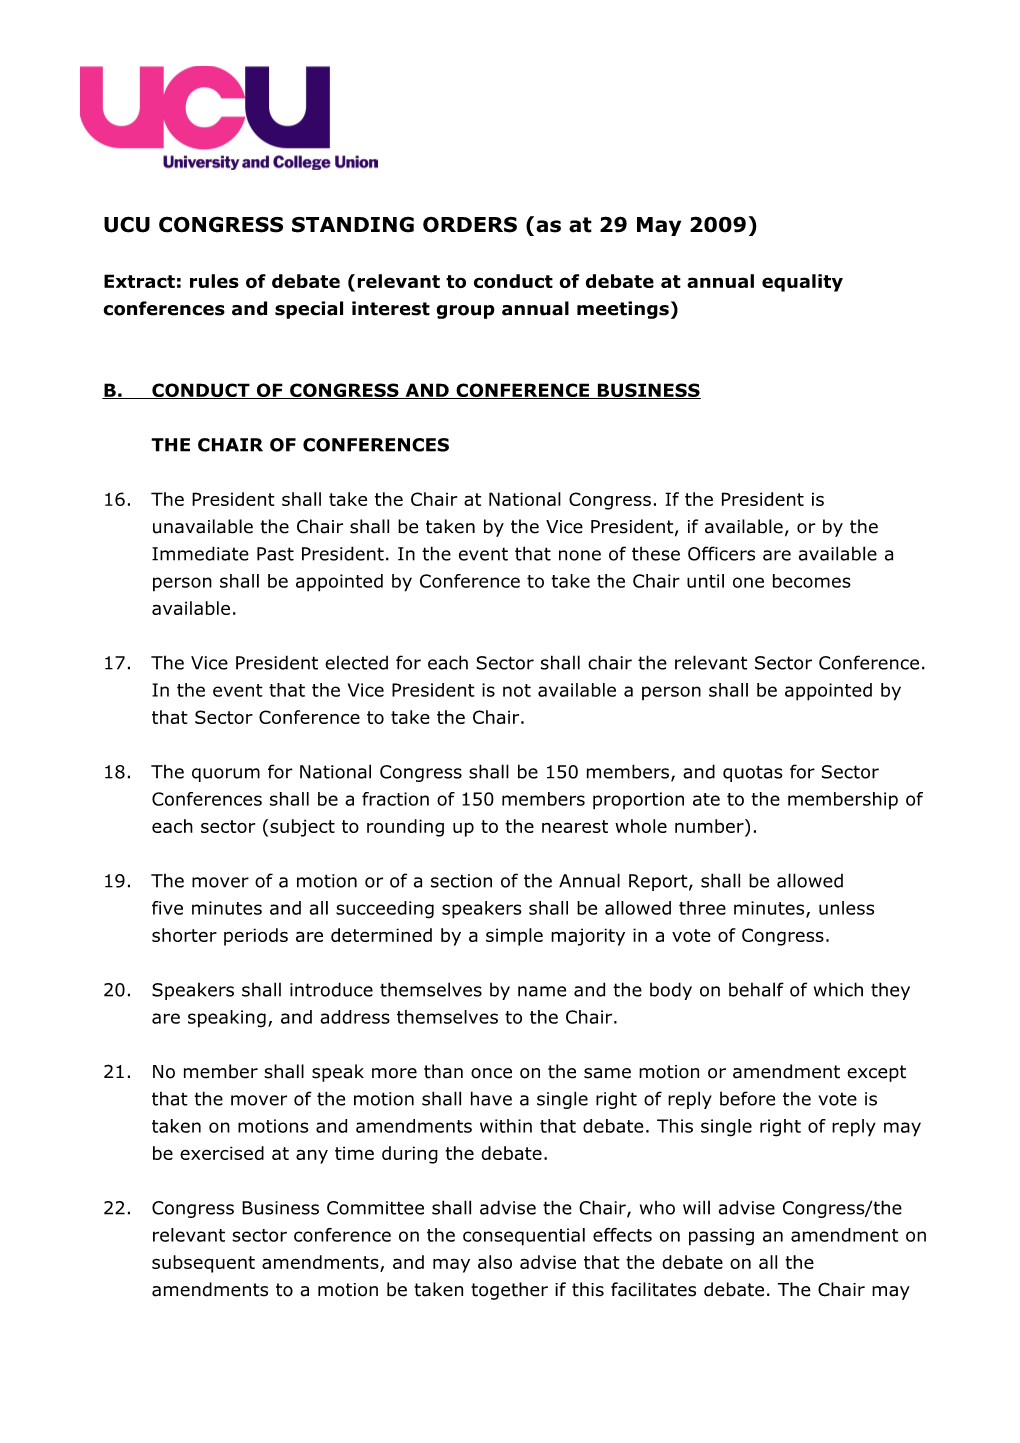 UCU CONGRESS STANDING ORDERS (As at 29 May 2009)